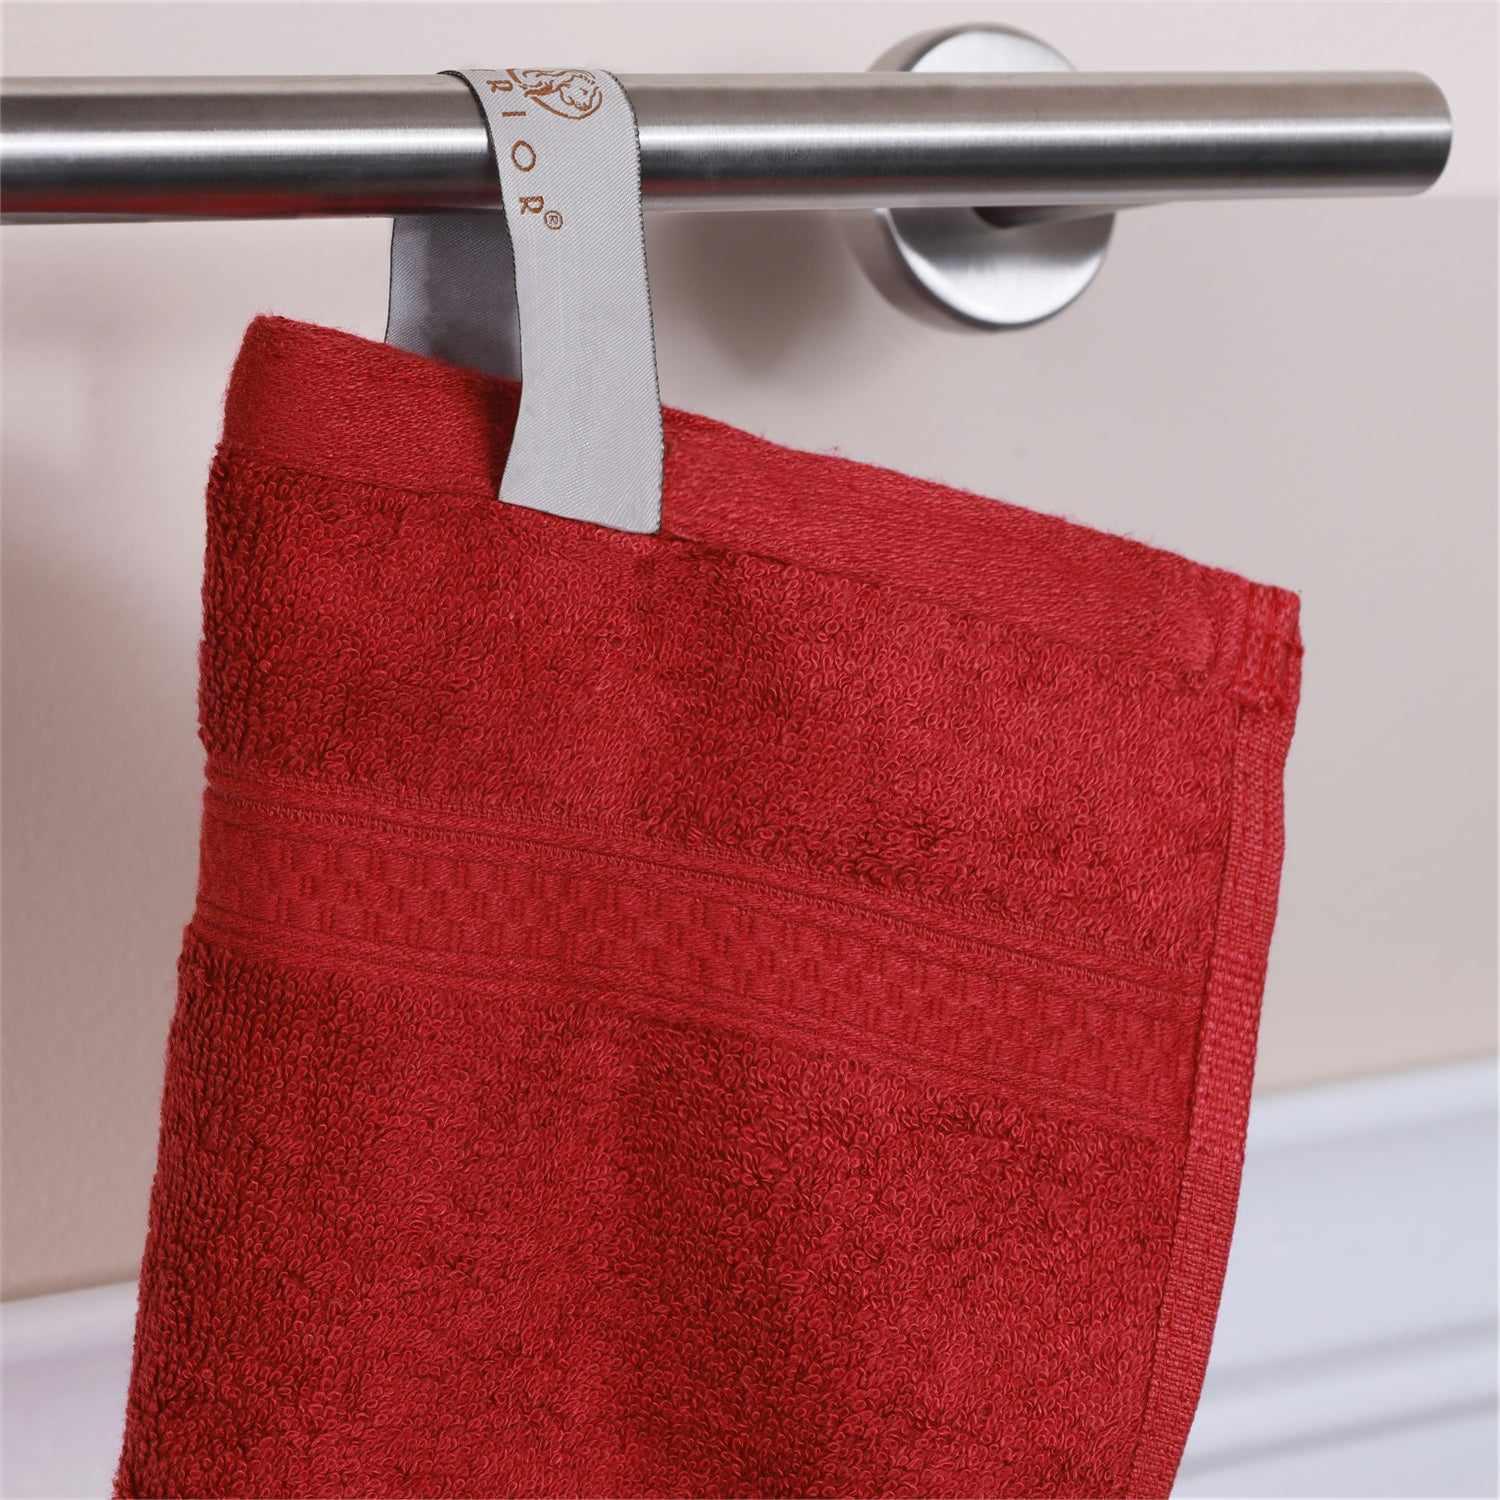  Ultra-Soft Hypoallergenic Rayon from Bamboo Cotton Blend Assorted Bath Towel Set -  Crimson